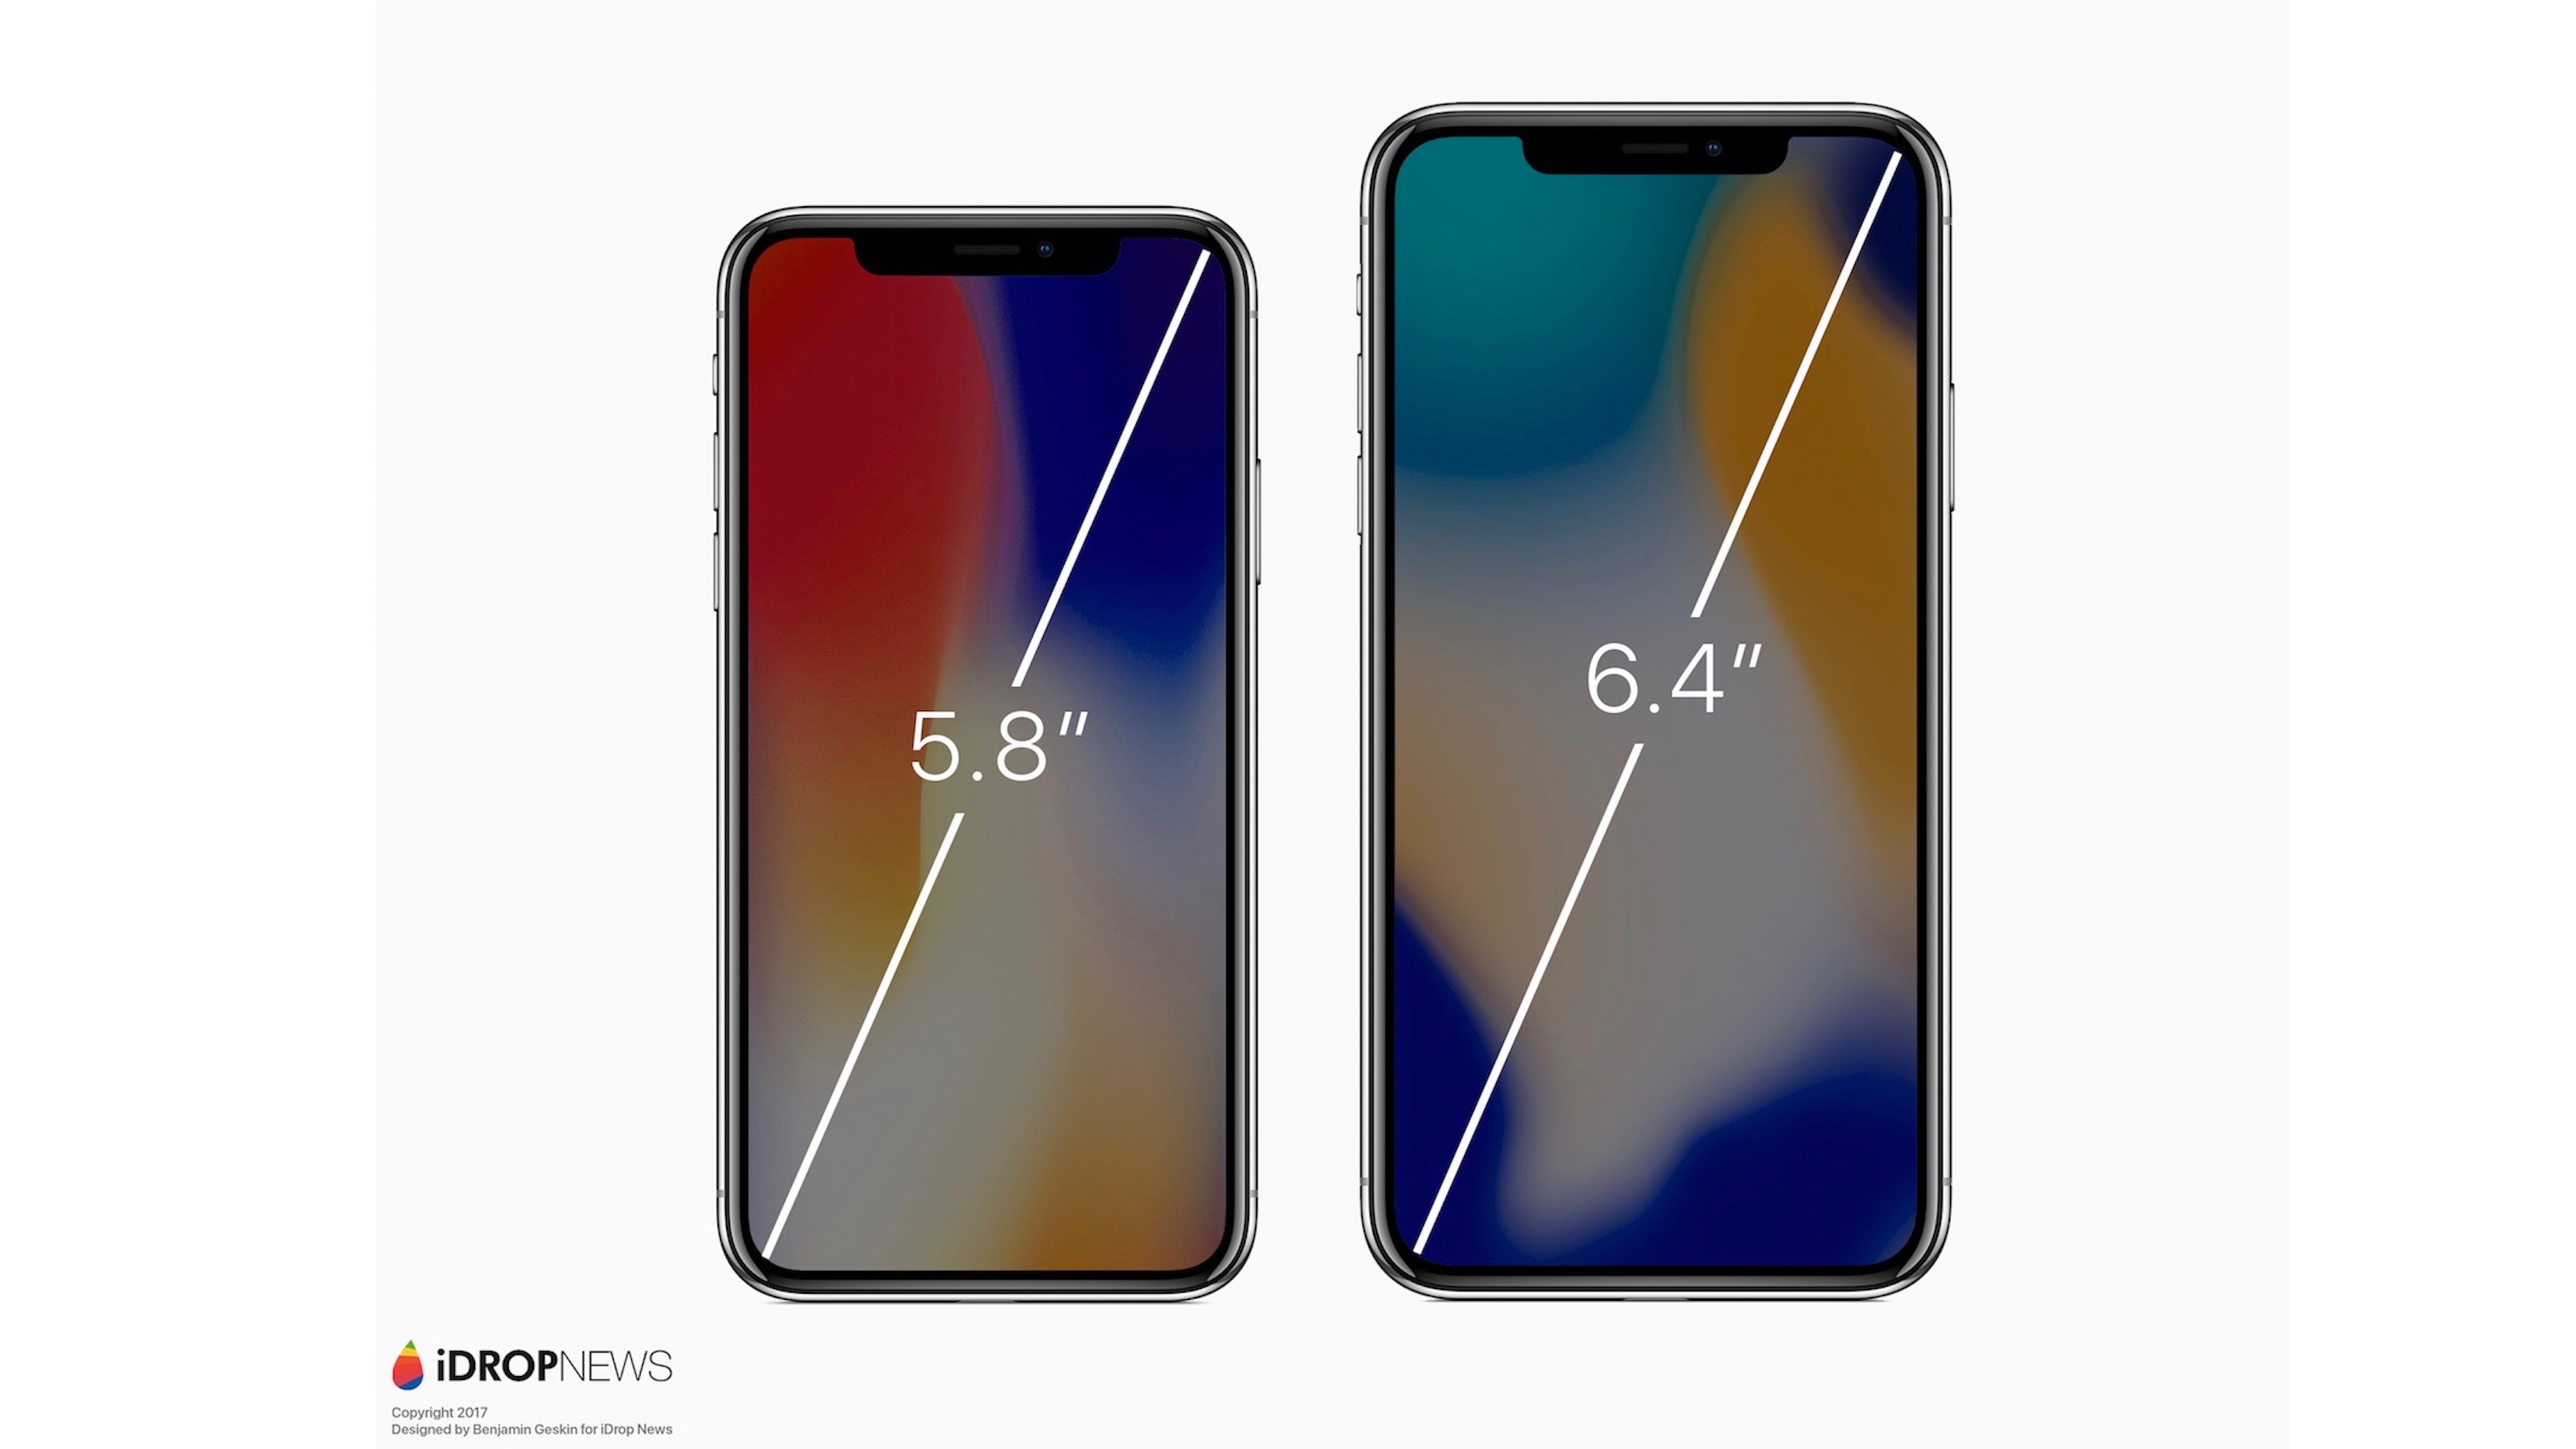 Renders imagine rumored 'iPhone X Plus' with 6.4-inch ...